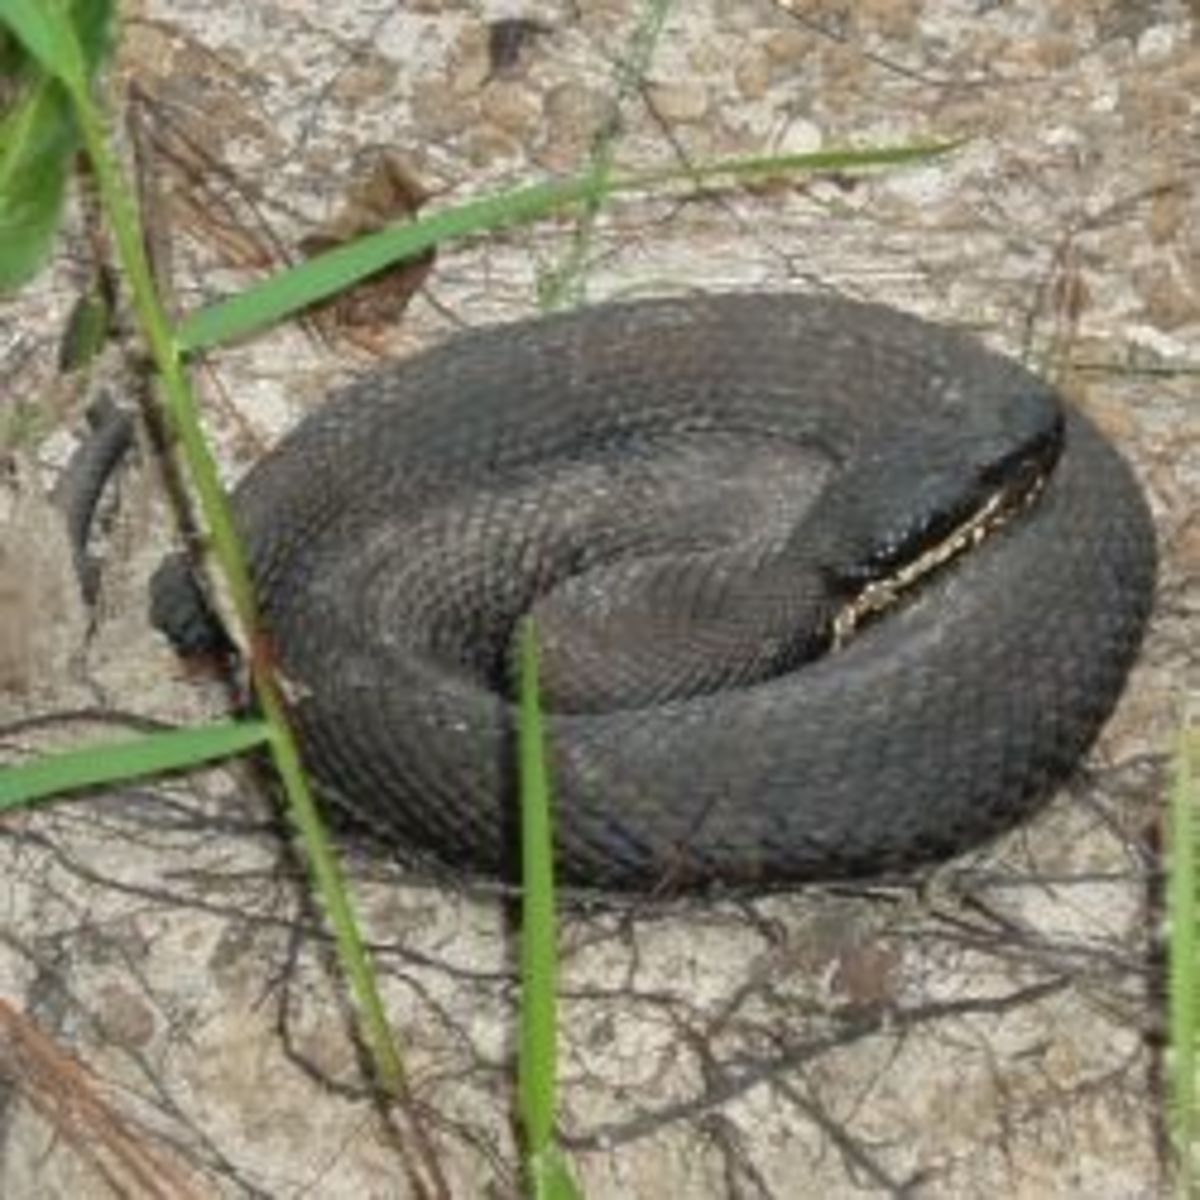 Cottonmouth Moccasin Snake